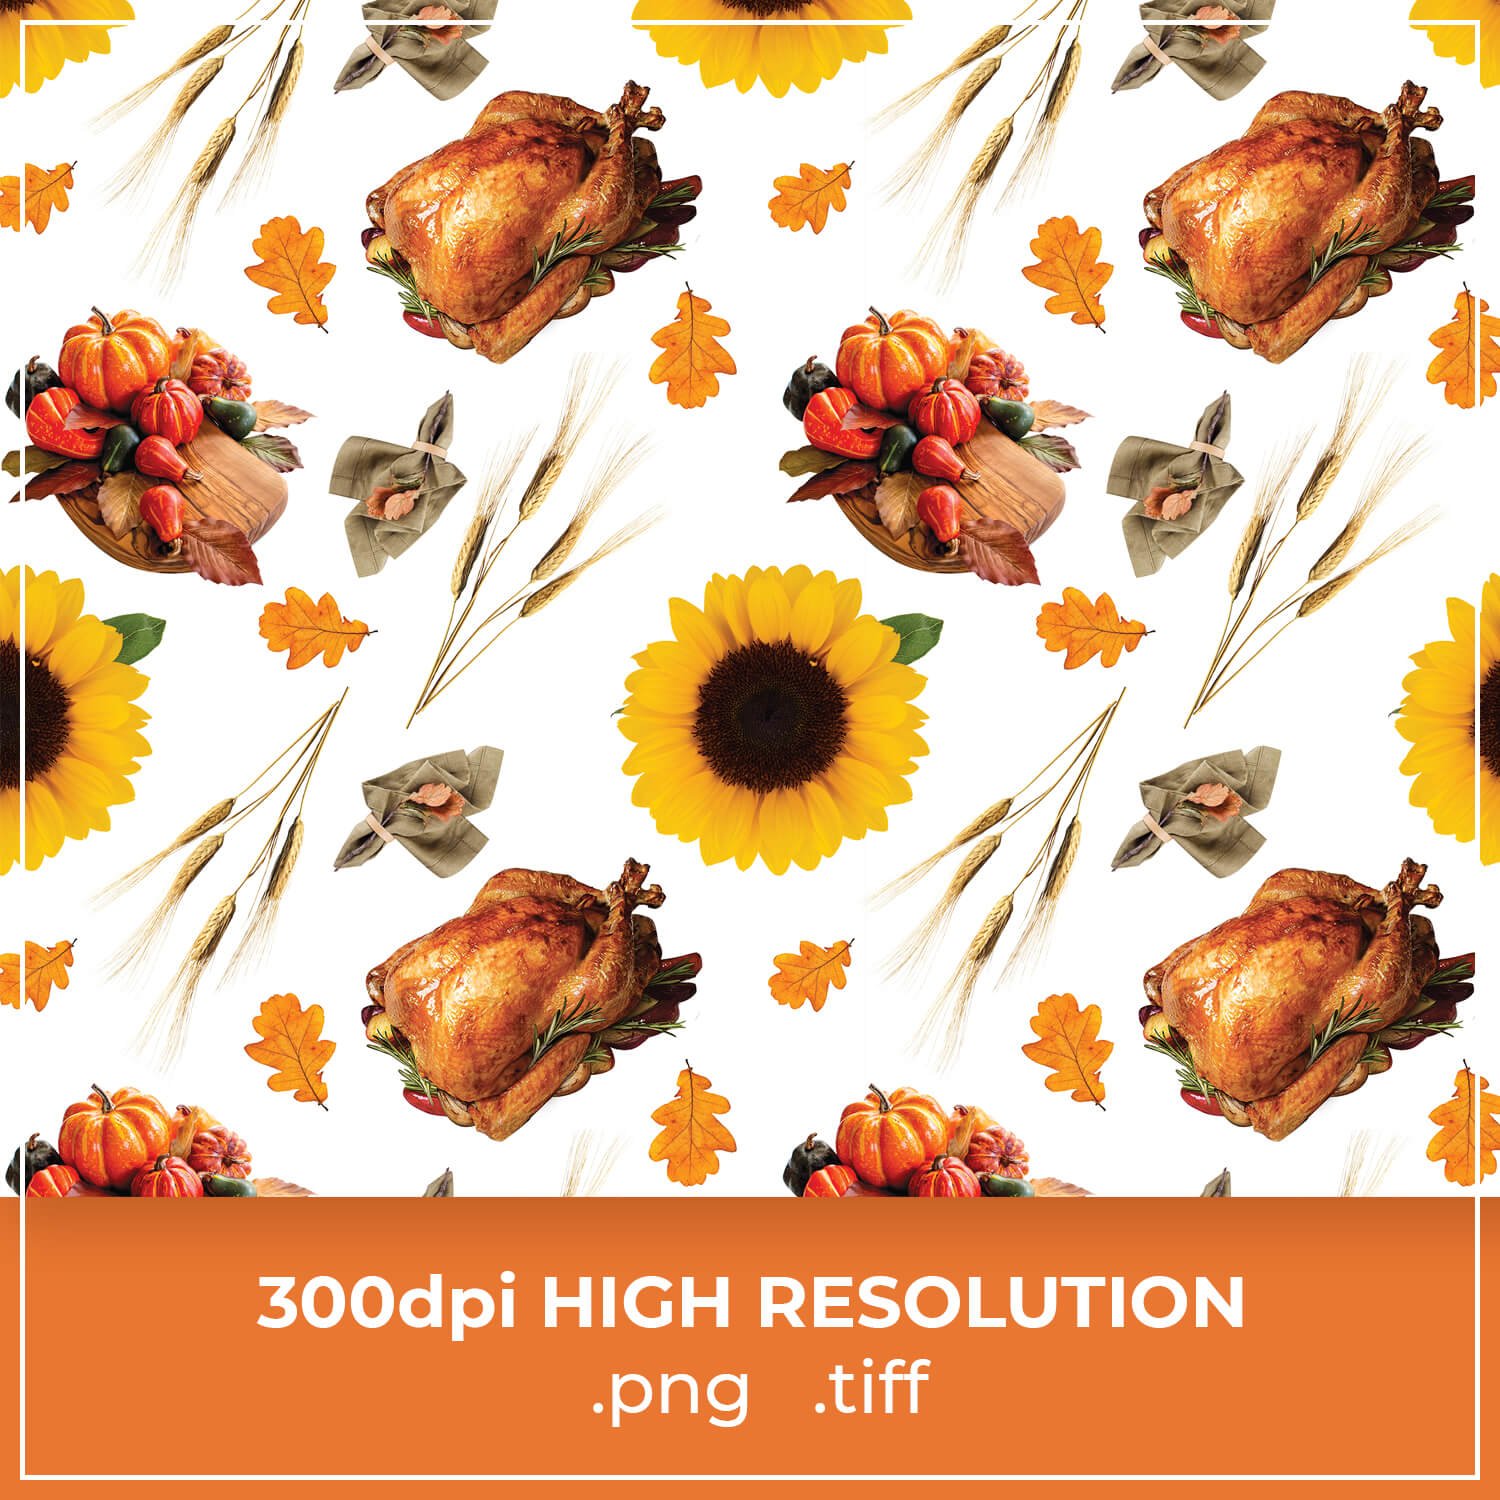 Free Happy Thanksgiving Pattern cover image.